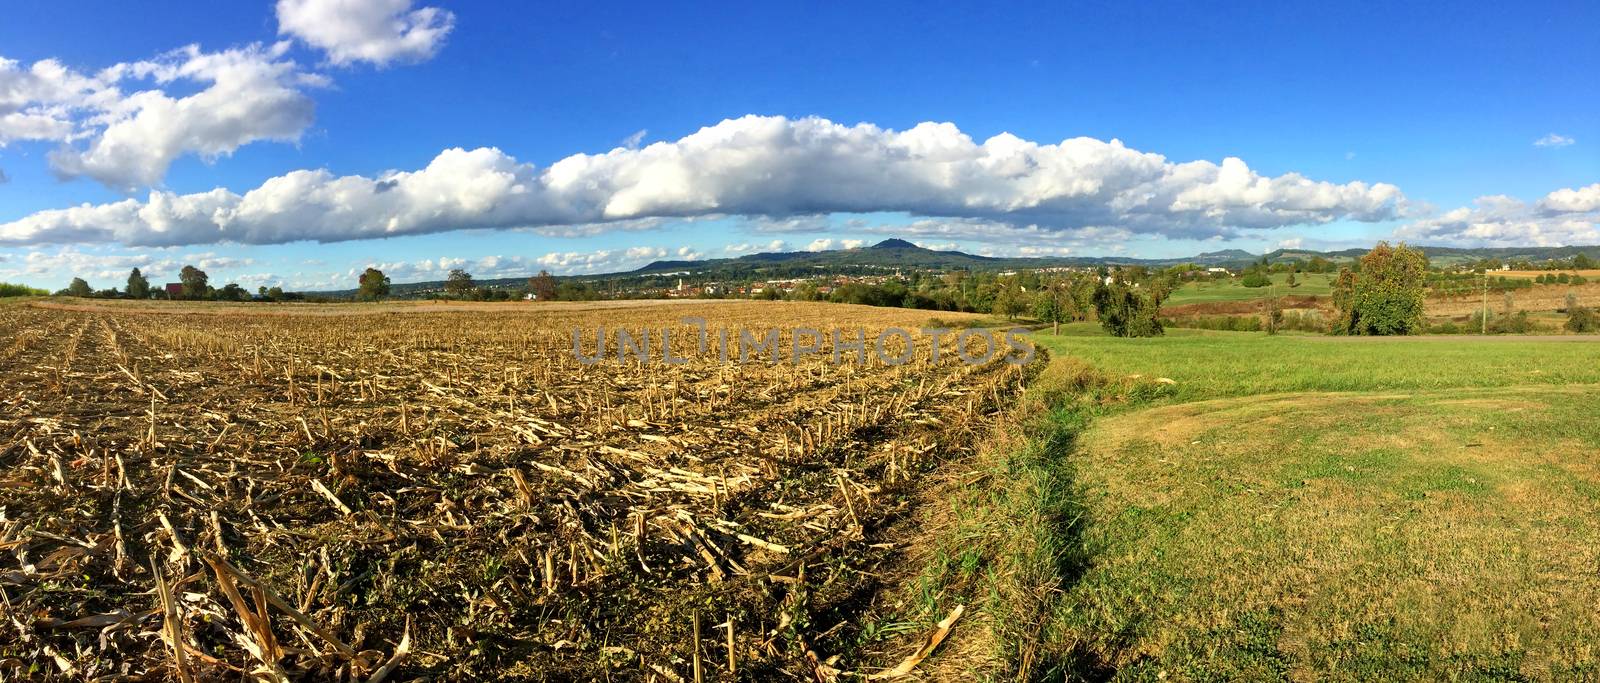 harvested corn field with mountain in the background